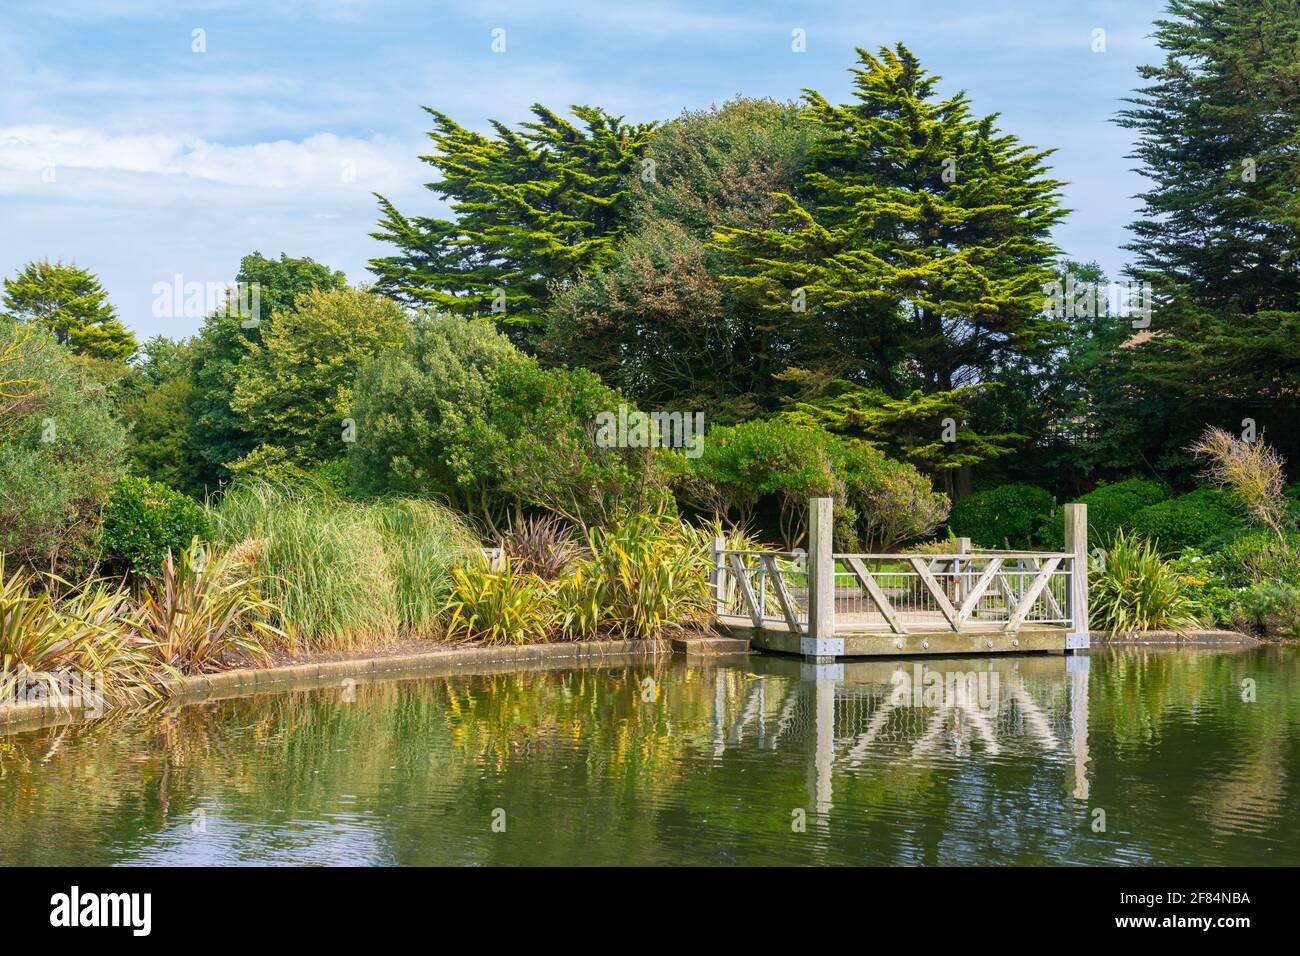 Landscape scene of greenery and a wooden viewing platform by a small lake in Summer in Mewsbrook Park, Littlehampton, West Sussex, England, UK. Stock Photo